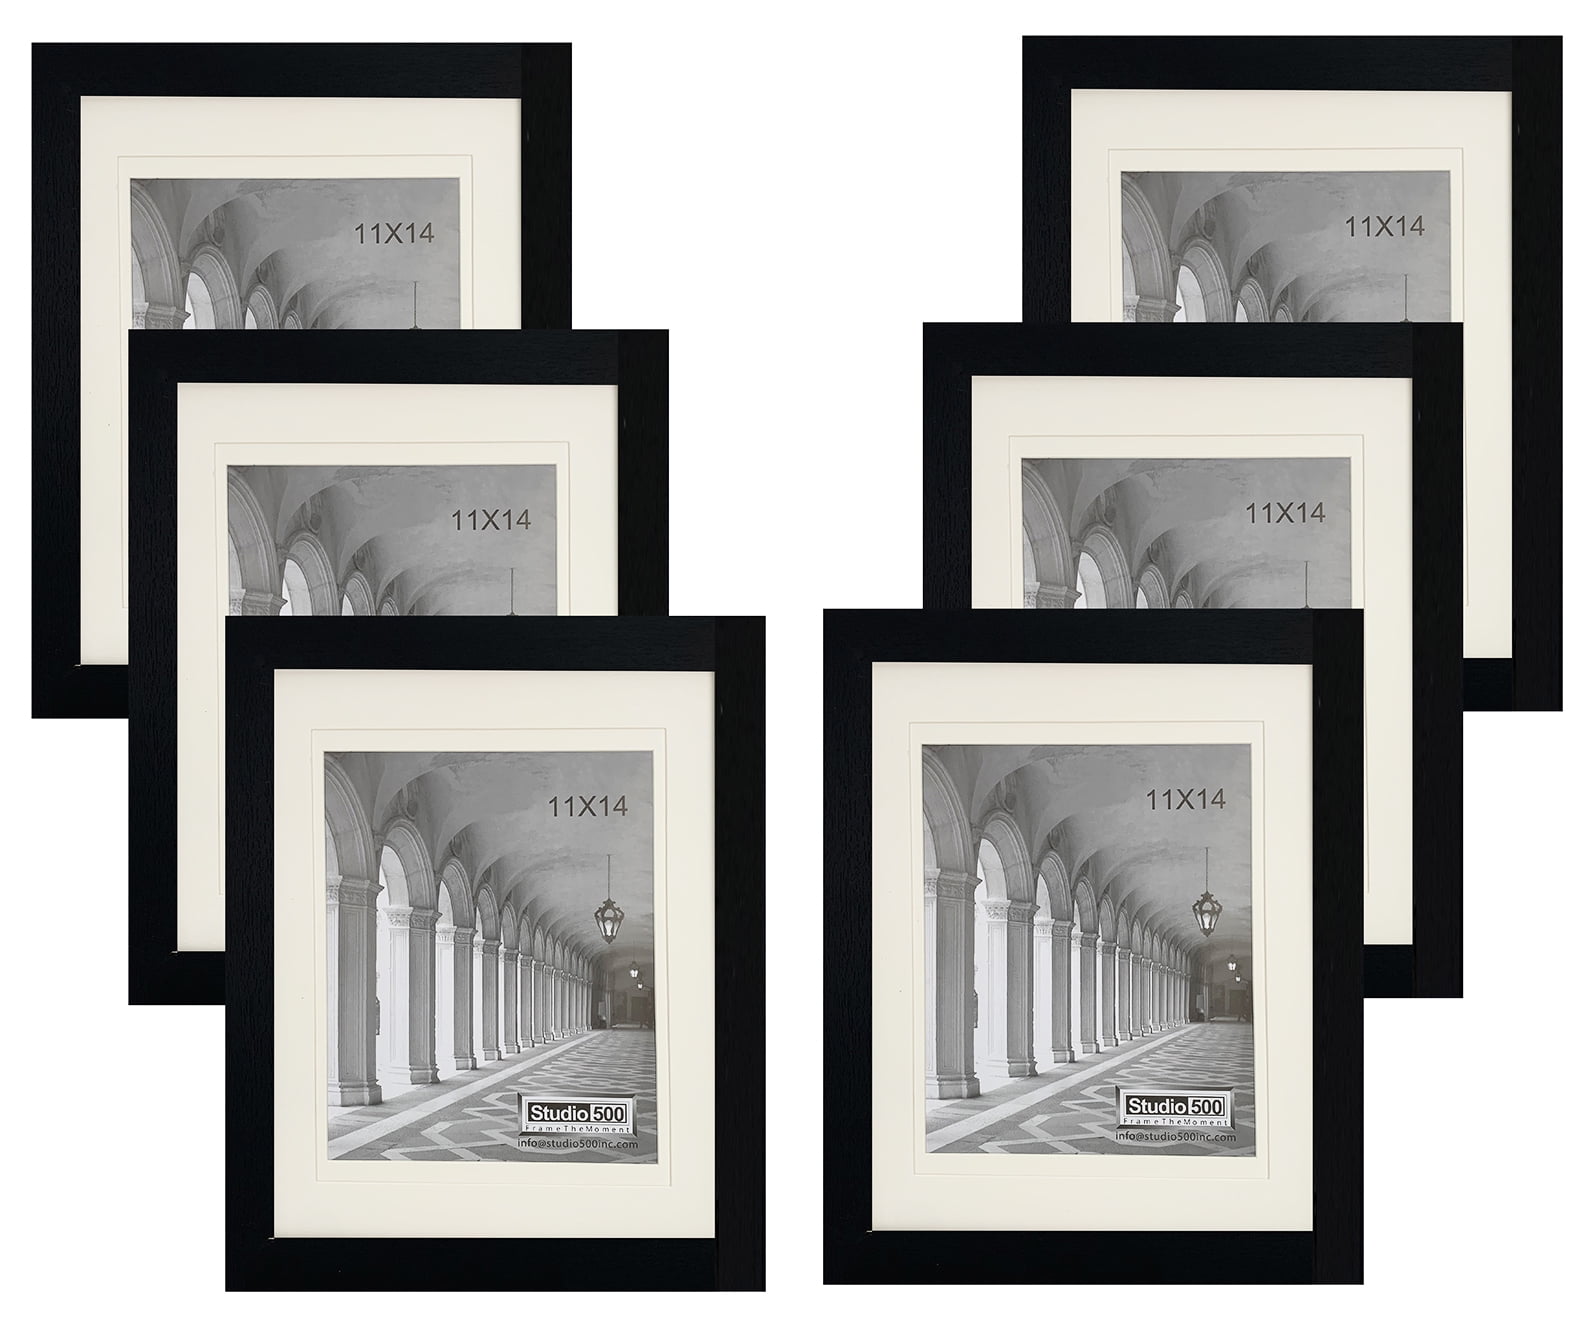 11x14 Black Wood Picture Frame and Clear Glass with Single White mat for 8x12.